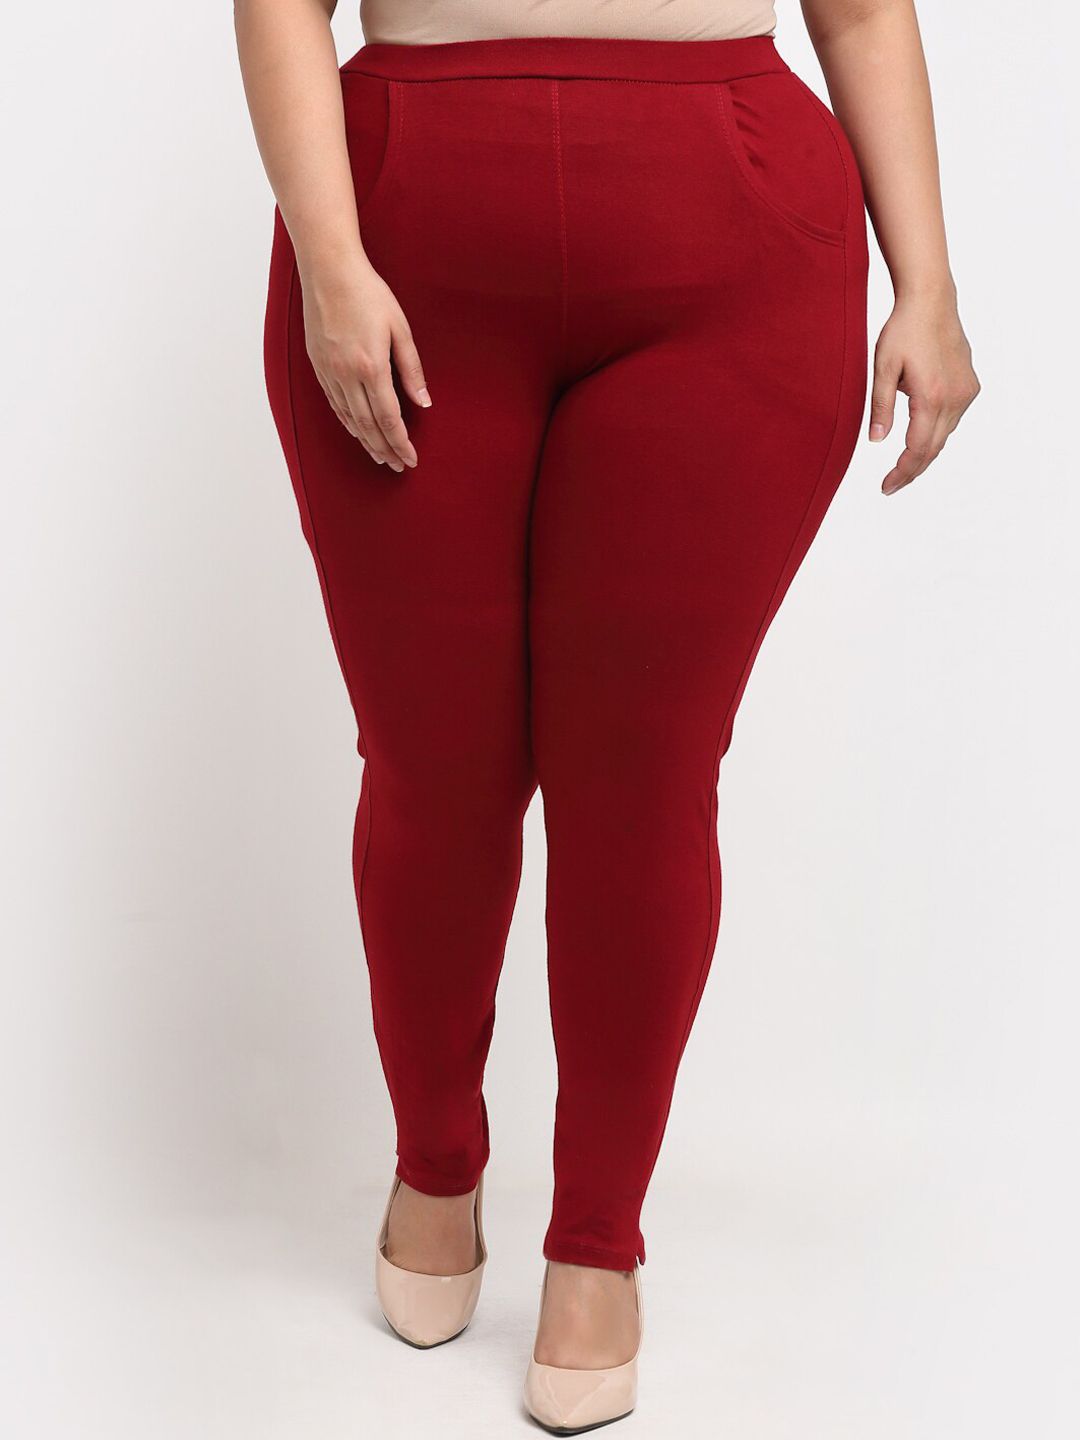 TAG 7 PLUS Women Plus Size Maroon Solid Ankle Length Leggings Price in India